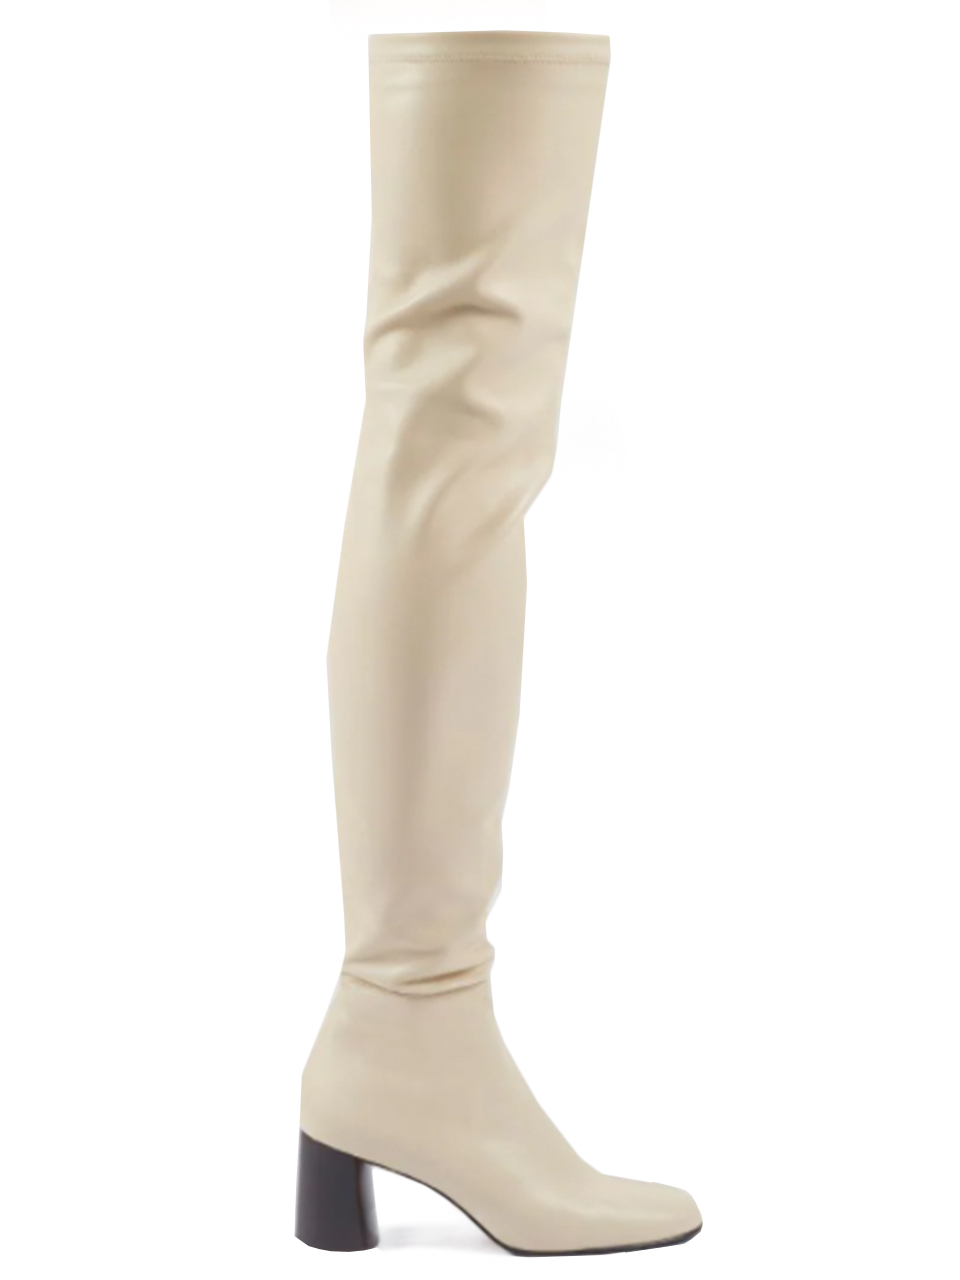 3.1 PHILLIP LIM Nadia Soft Over The Knee Boot in Bone Side View 